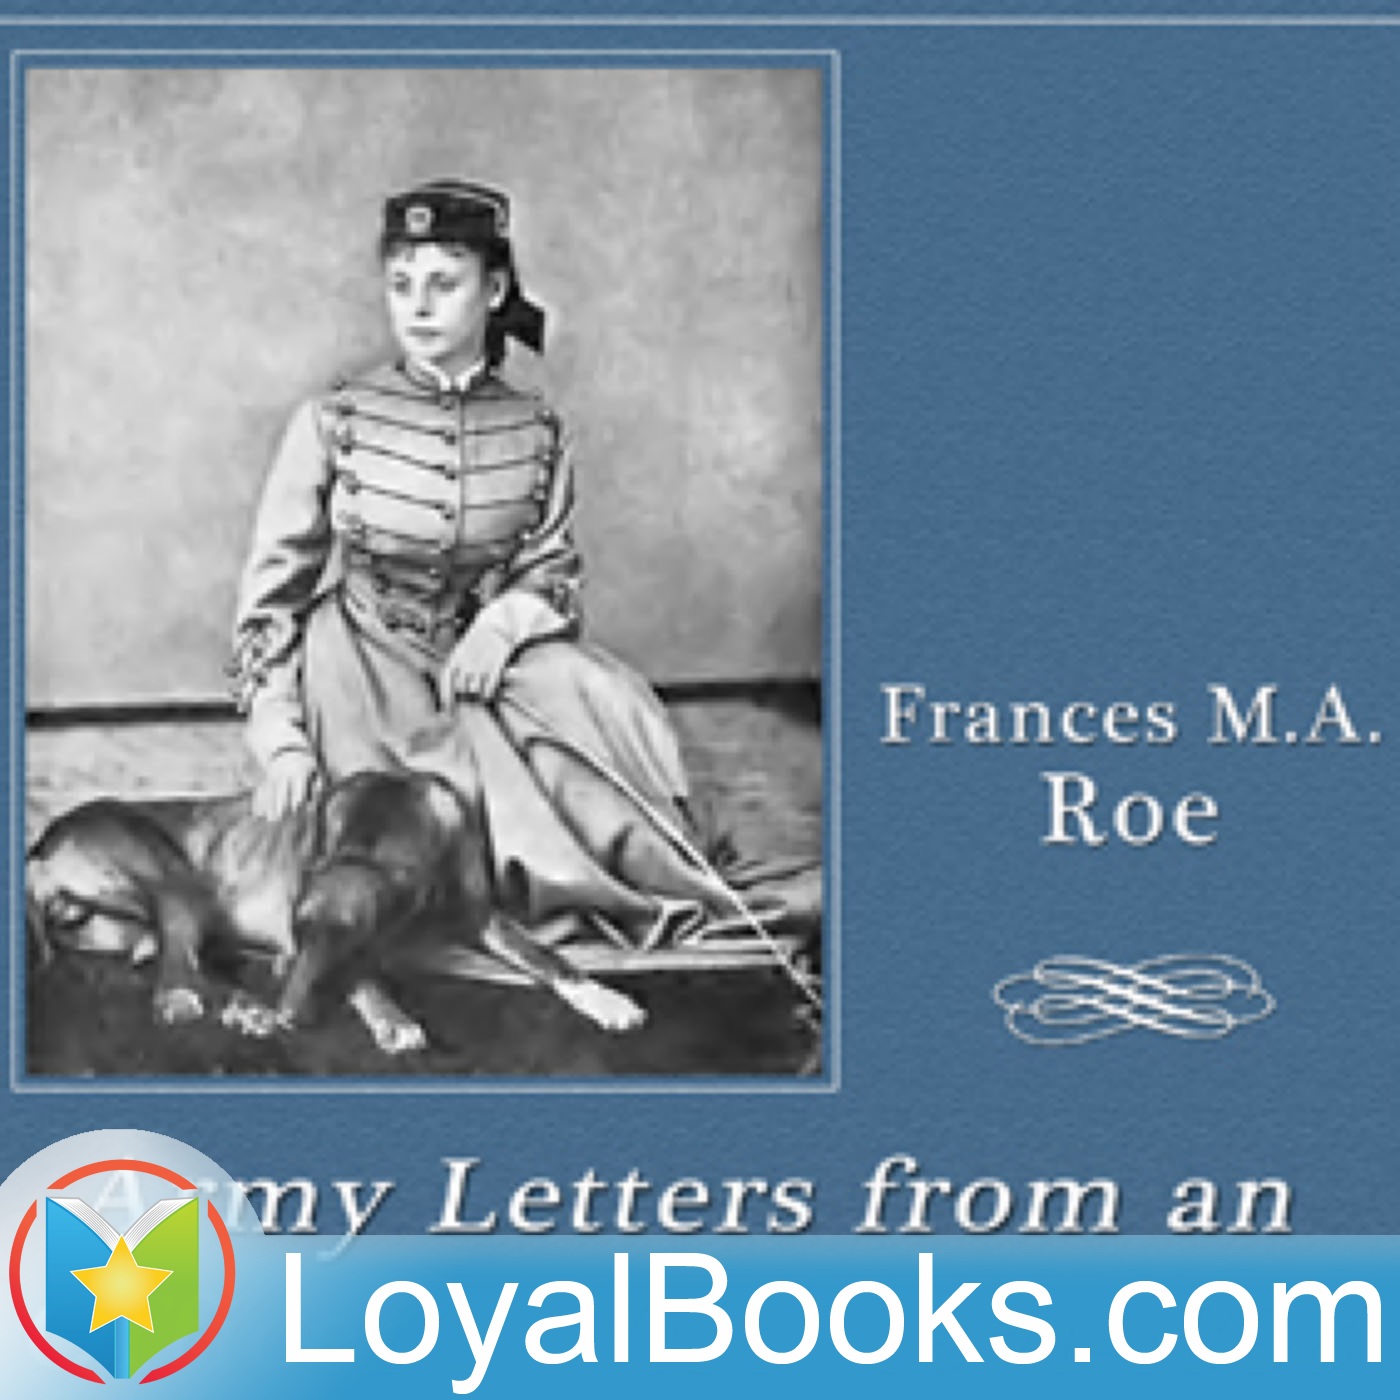 Army Letters from an Officer's Wife, 1871-1888 by Frances M. A. Roe